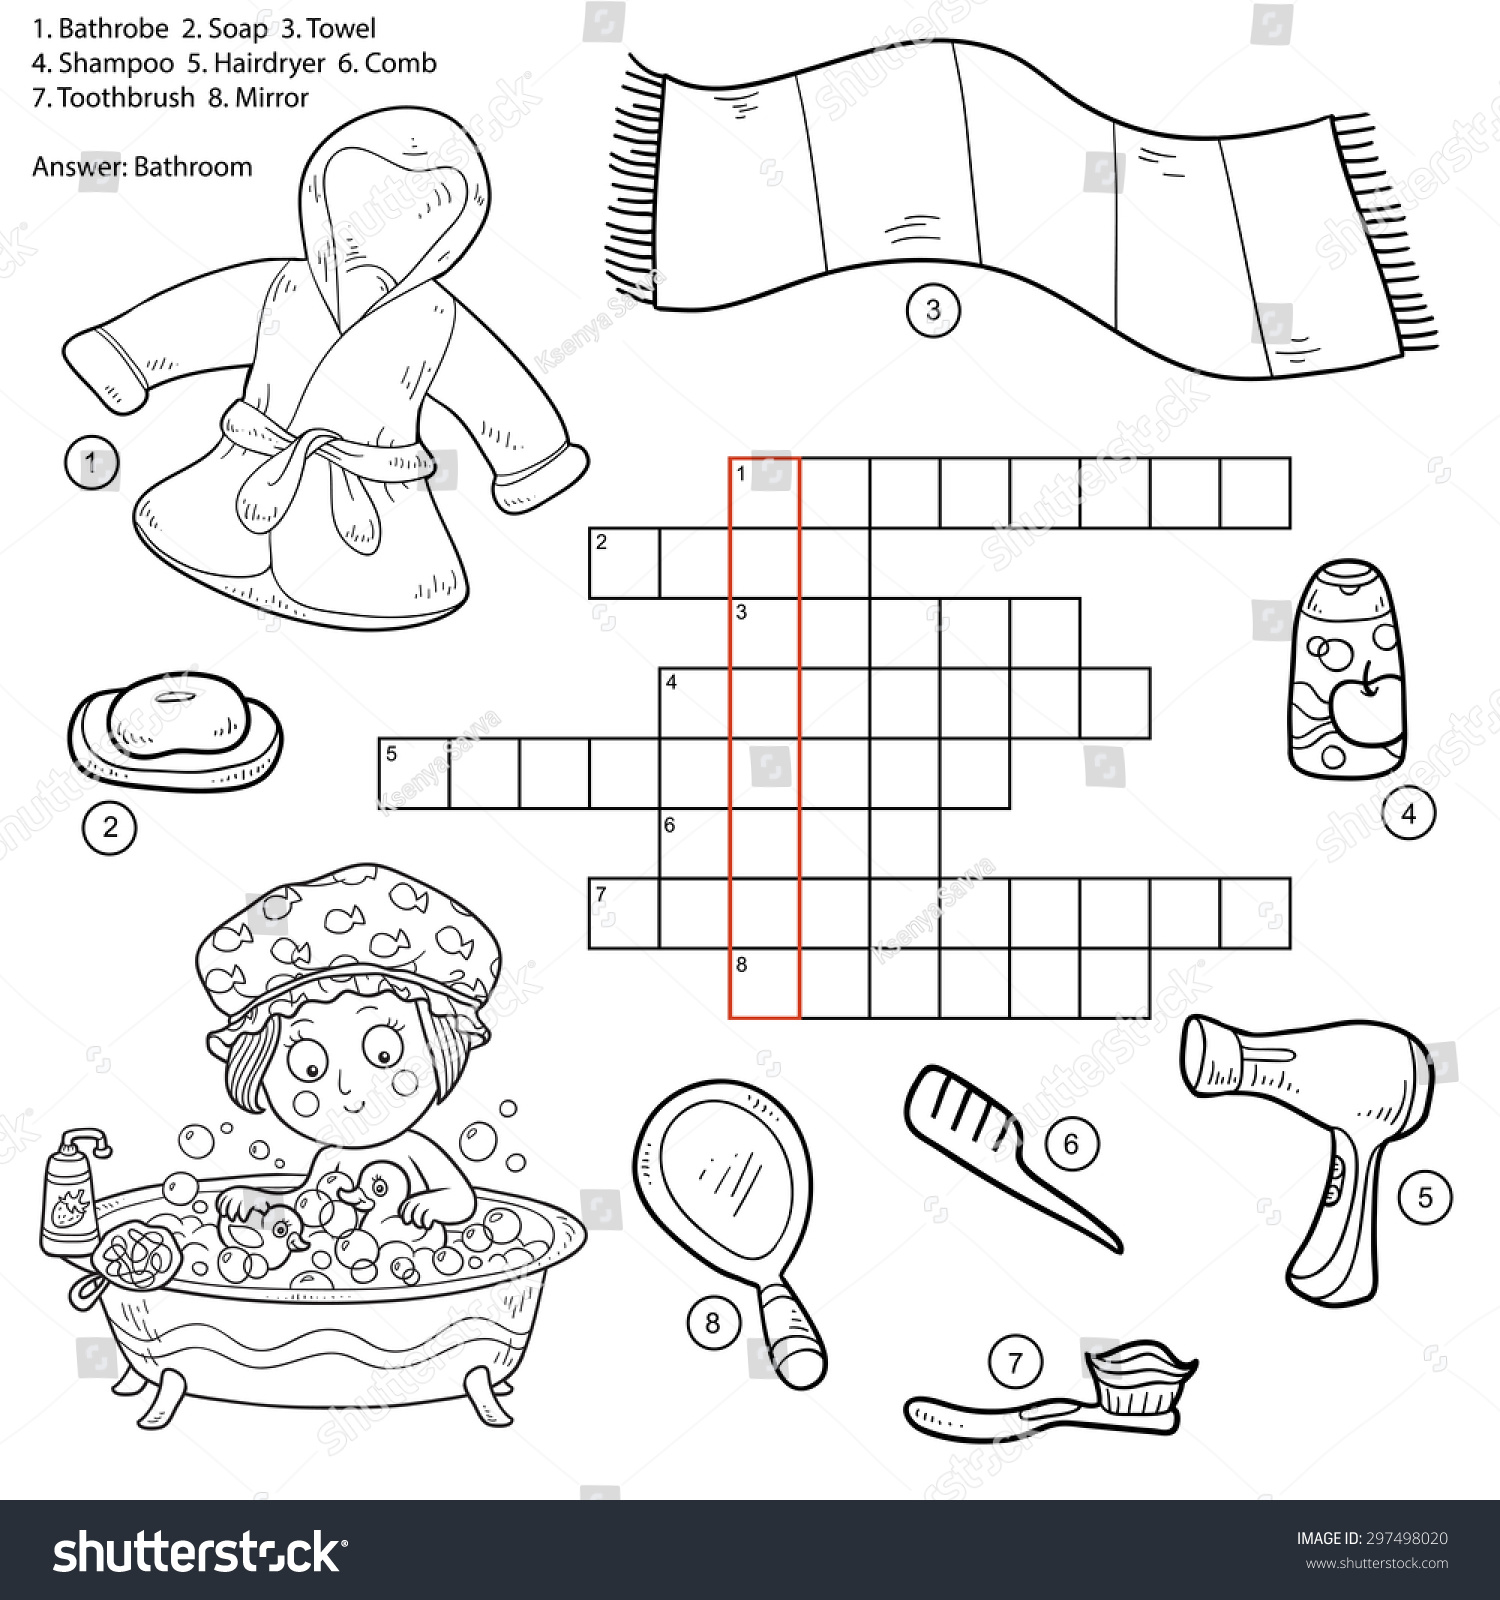 SVG of Vector colorless crossword, education game for children about bathroom and beauty items (bathrobe, soap, towel, shampoo, hairdryer, comb, toothbrush, mirror) svg